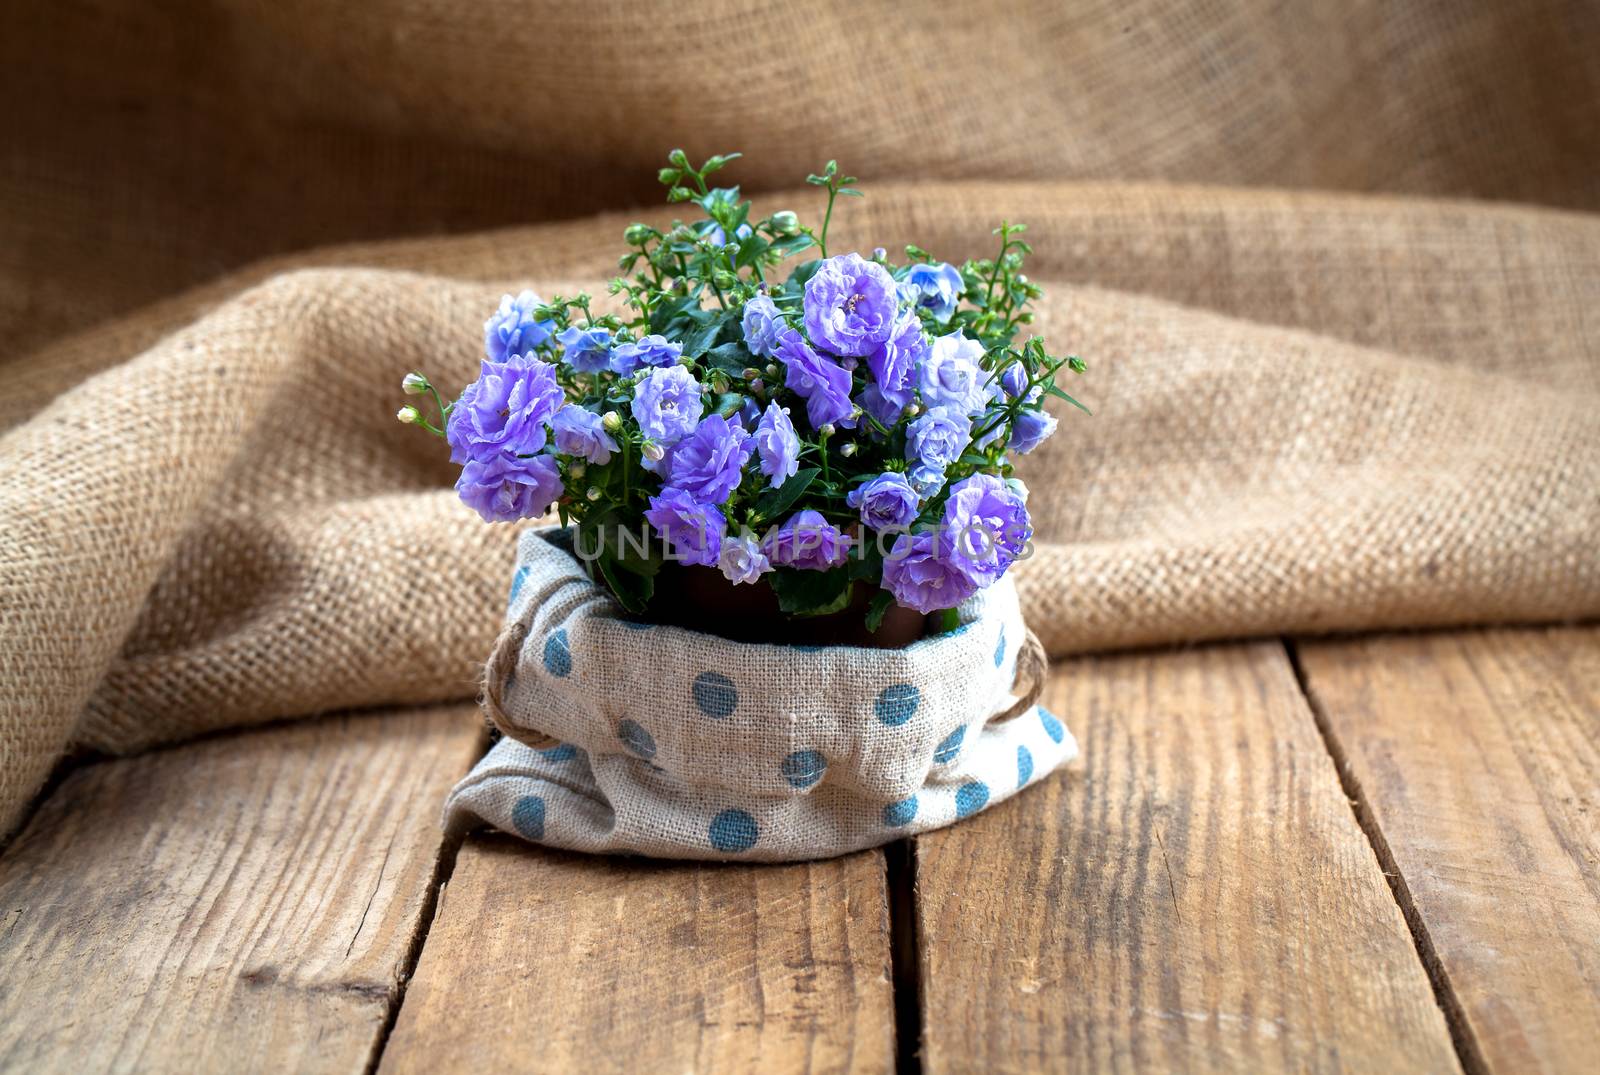 Campanula terry flowers in paper packaging, on sackcloth, wooden background